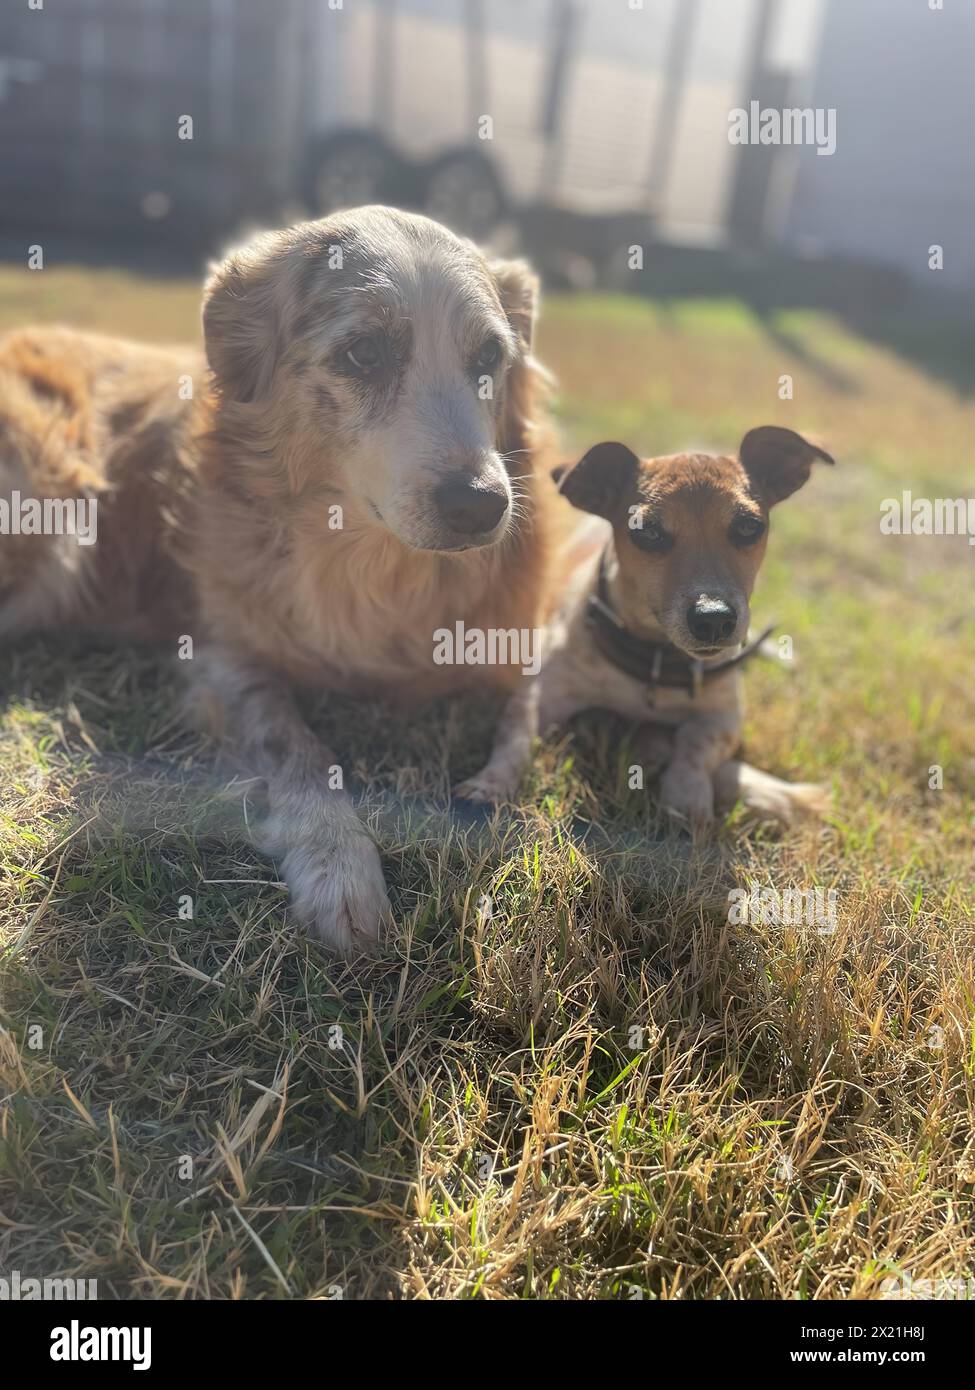 Two Dogs Laying Together in Grass Stock Photo